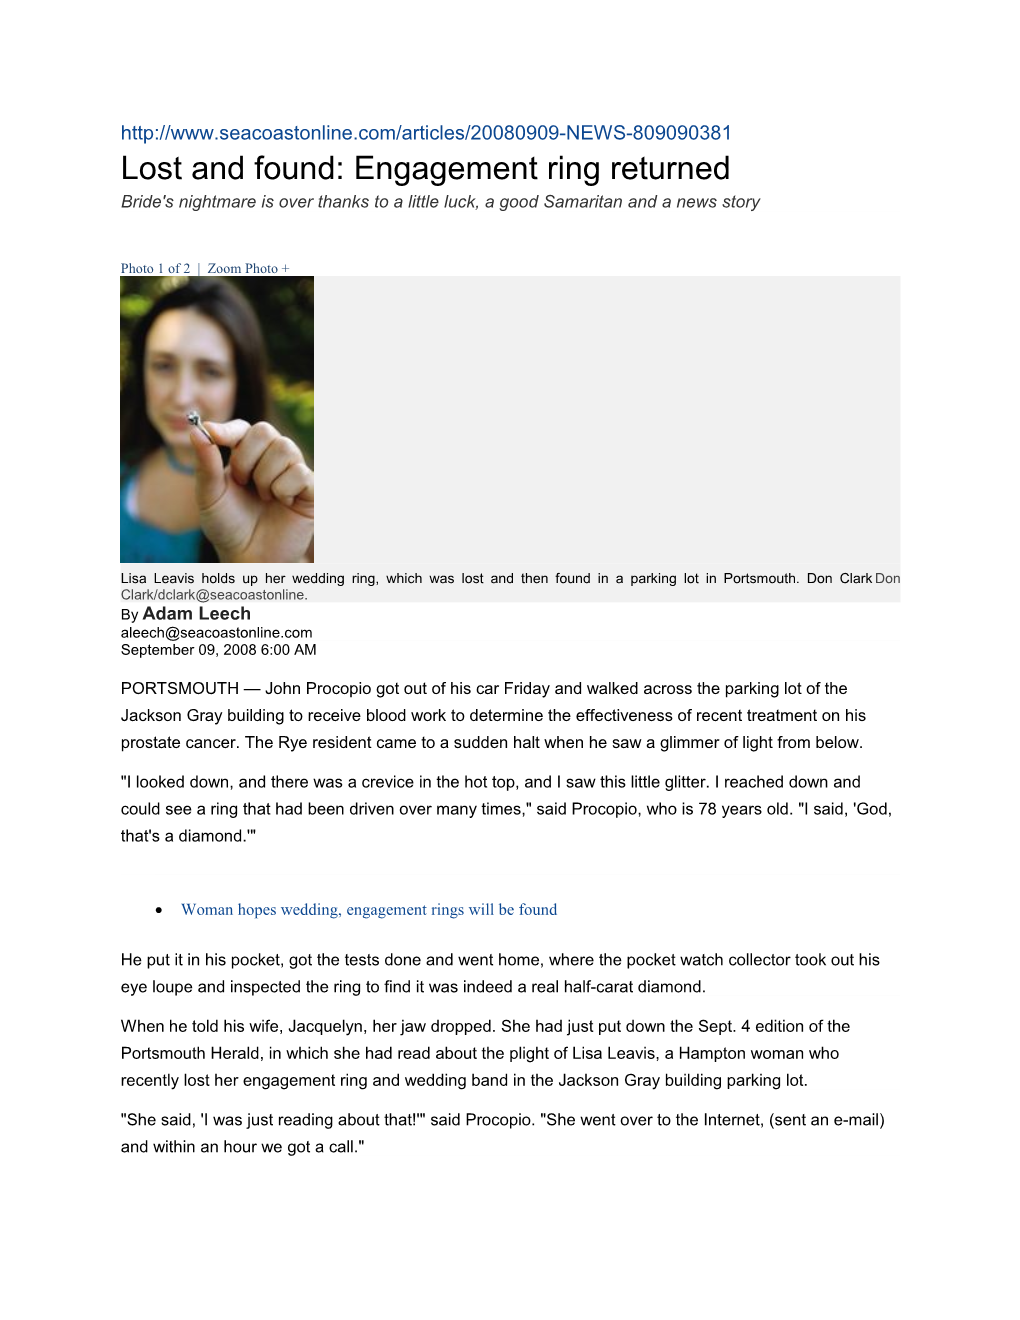 Lost and Found: Engagement Ring Returned